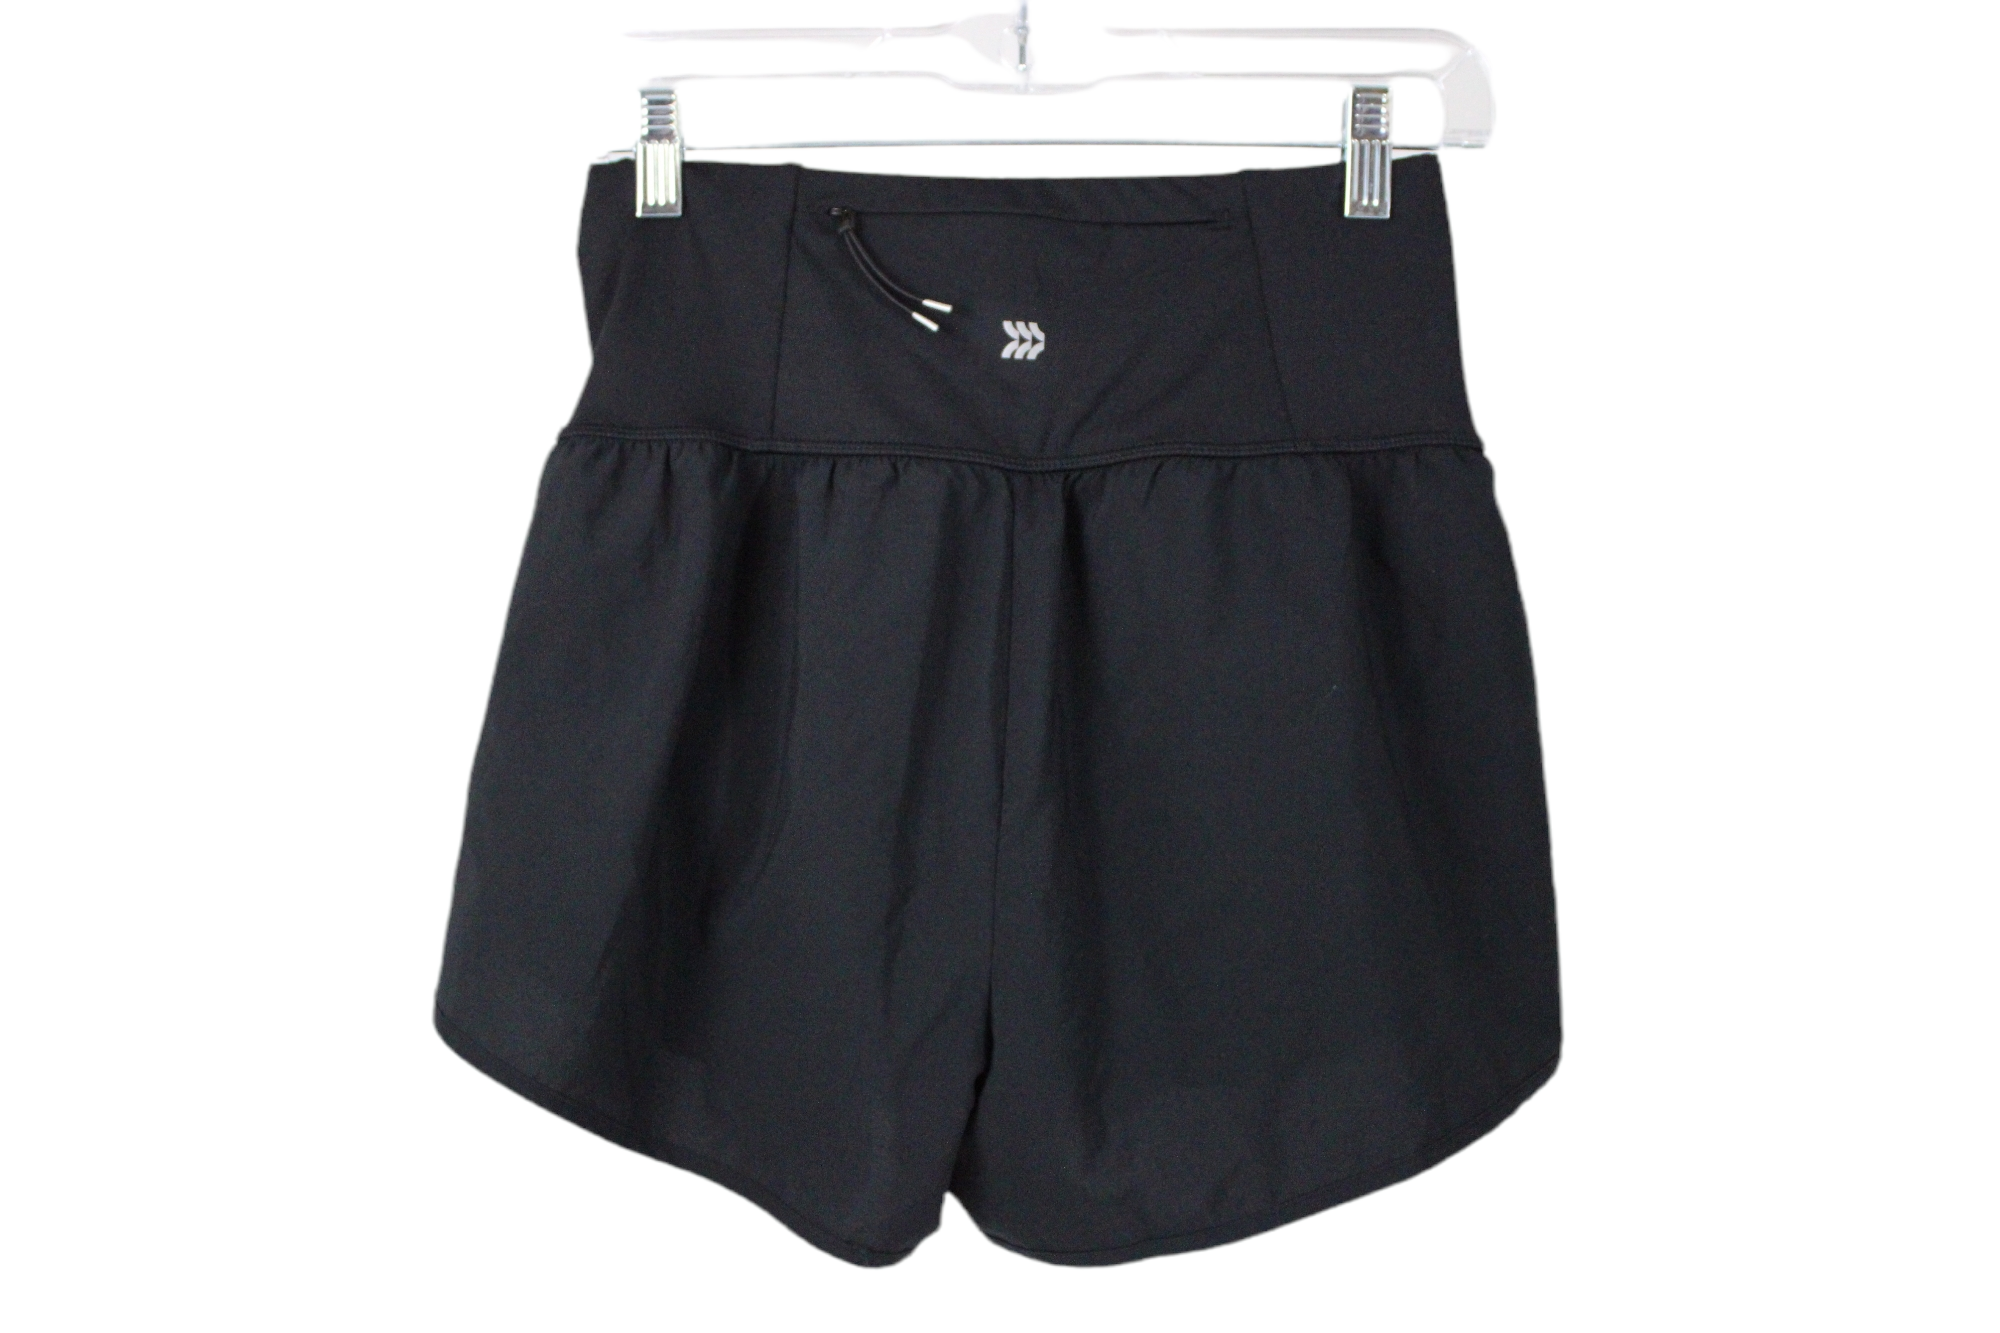 All IN Motion Black Athletic Shorts